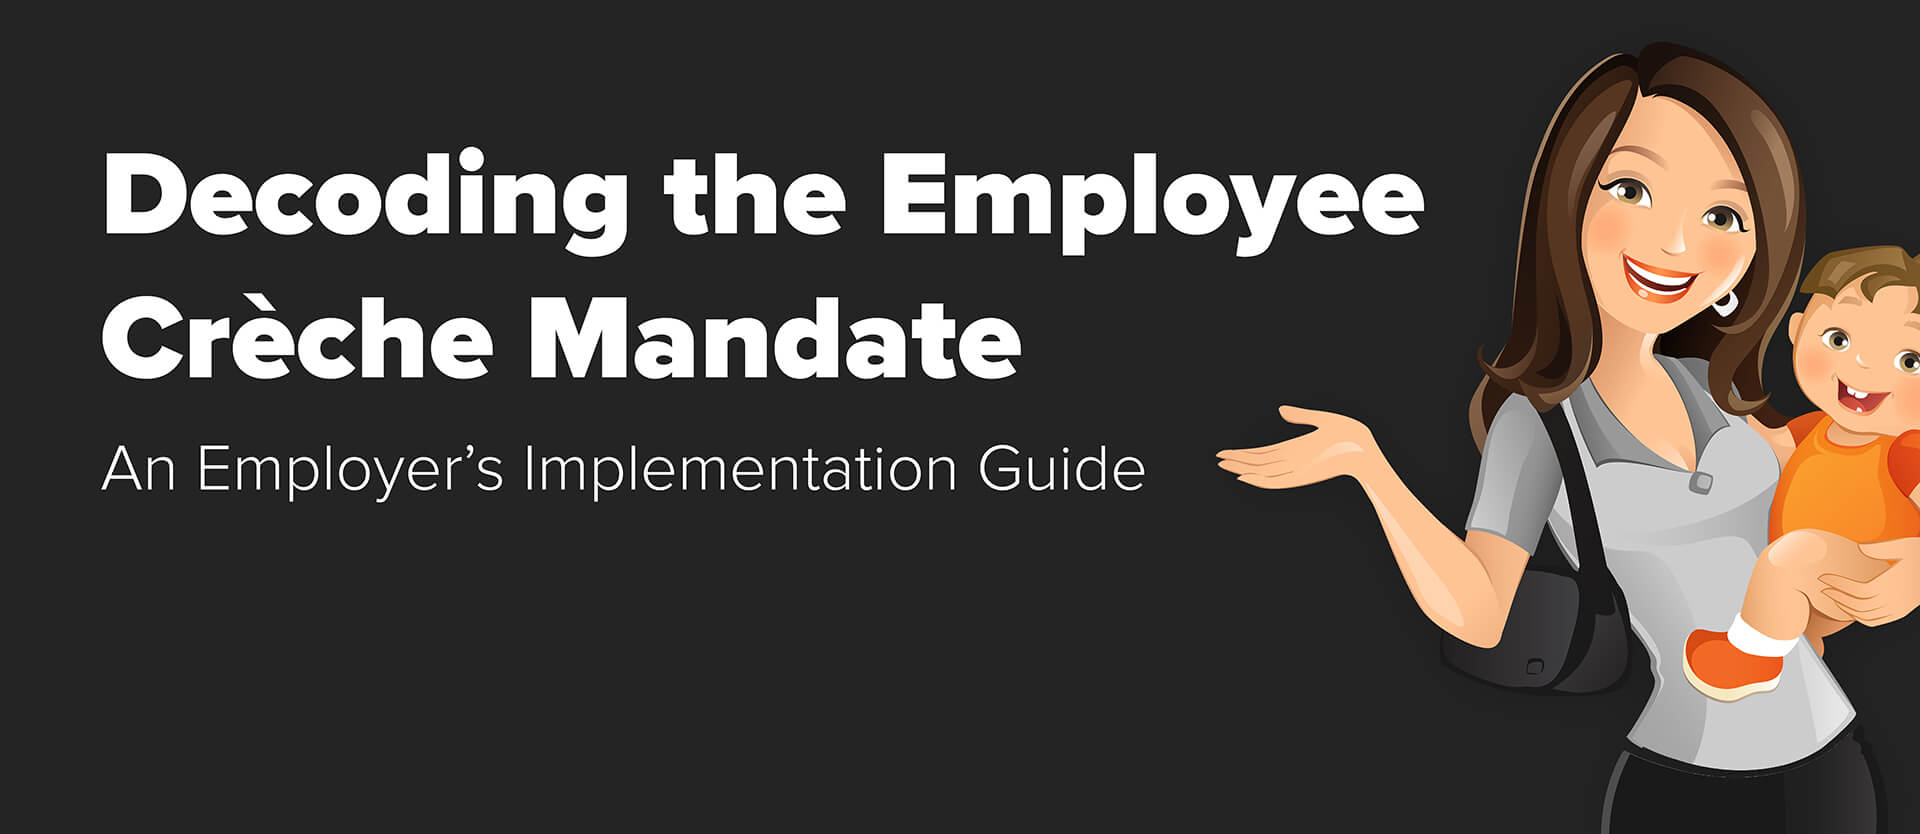 Employer's Implementation Guide